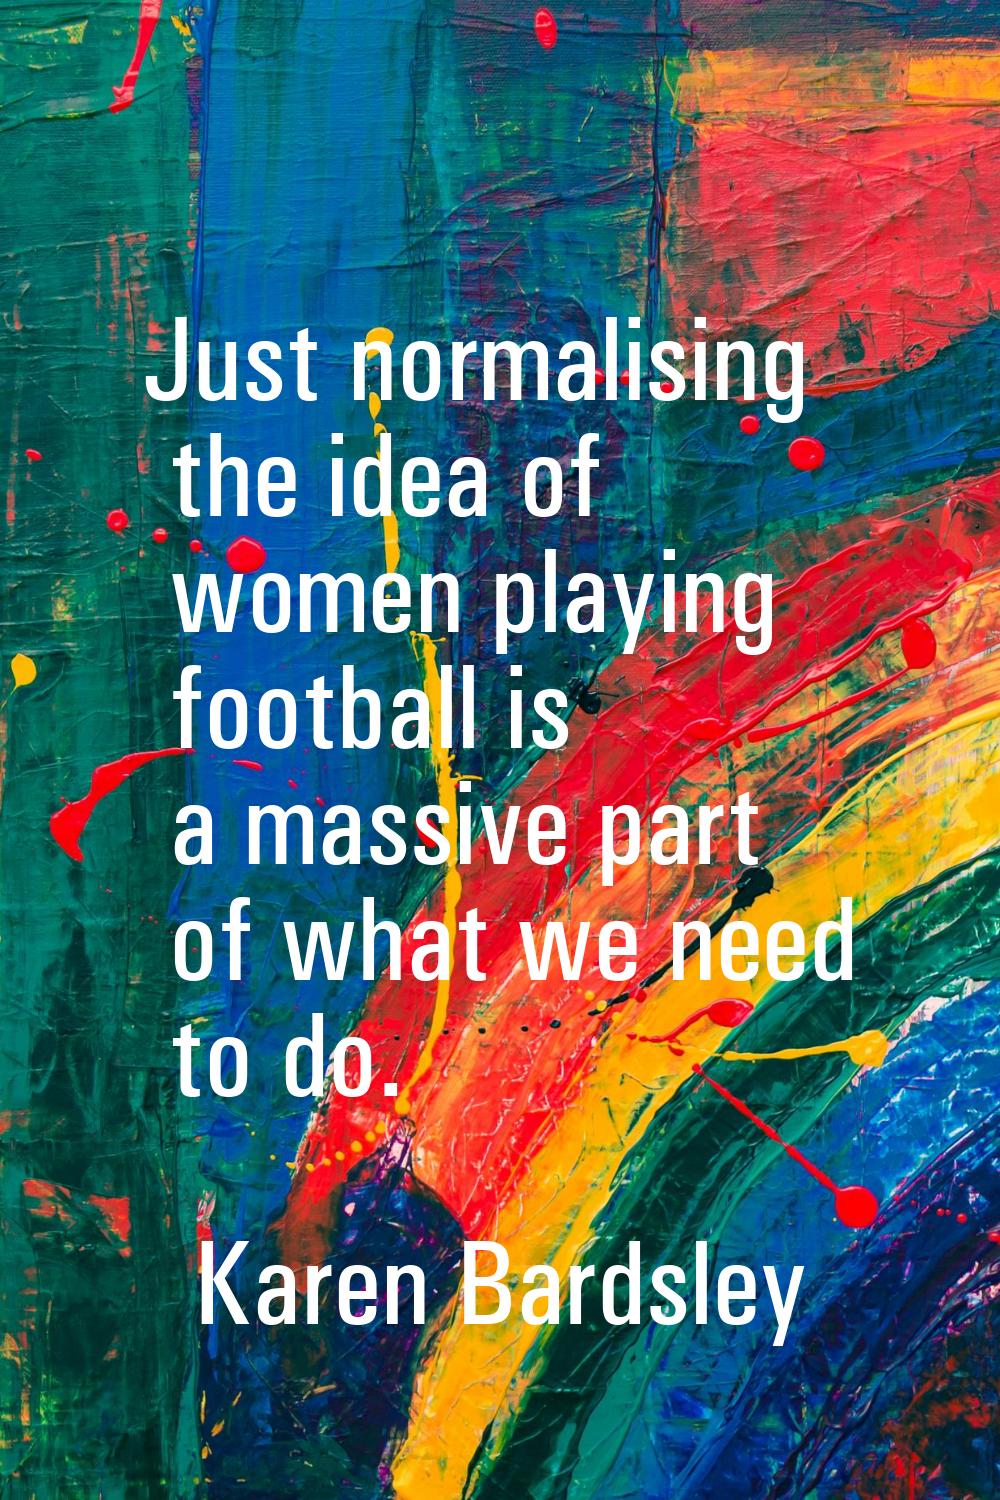 Just normalising the idea of women playing football is a massive part of what we need to do.